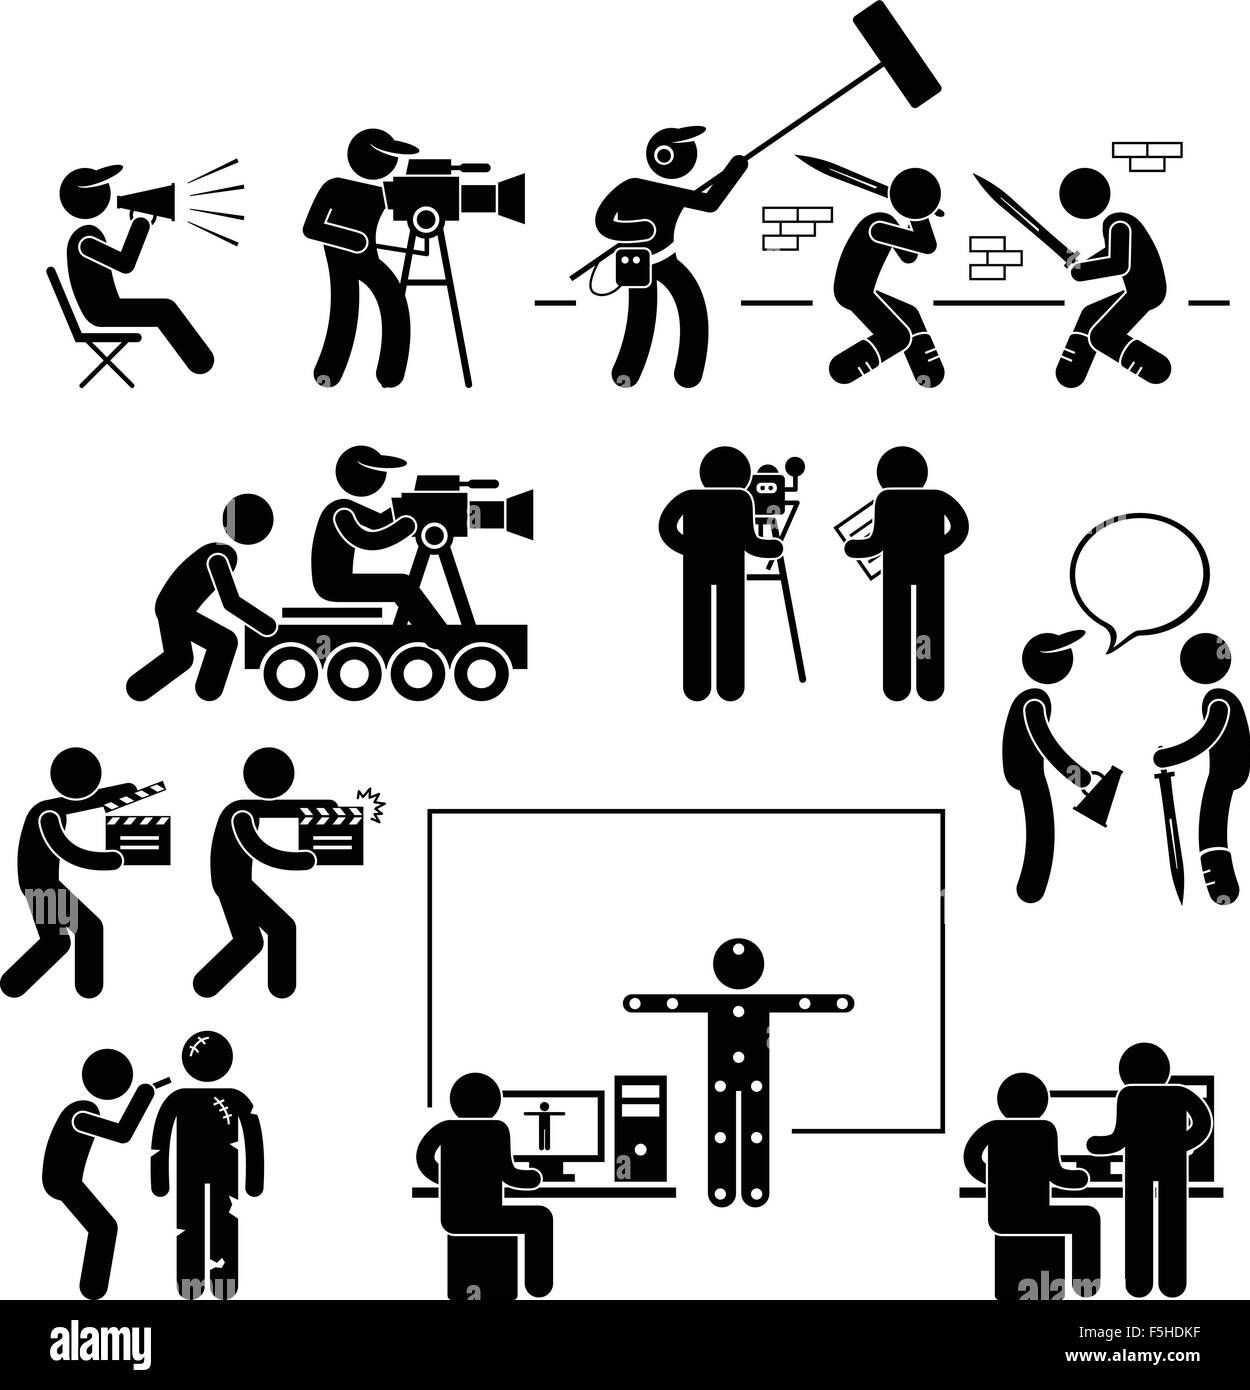 Director Making Filming Movie Production Actor Stick Figure Pictogram Icon Stock Vector